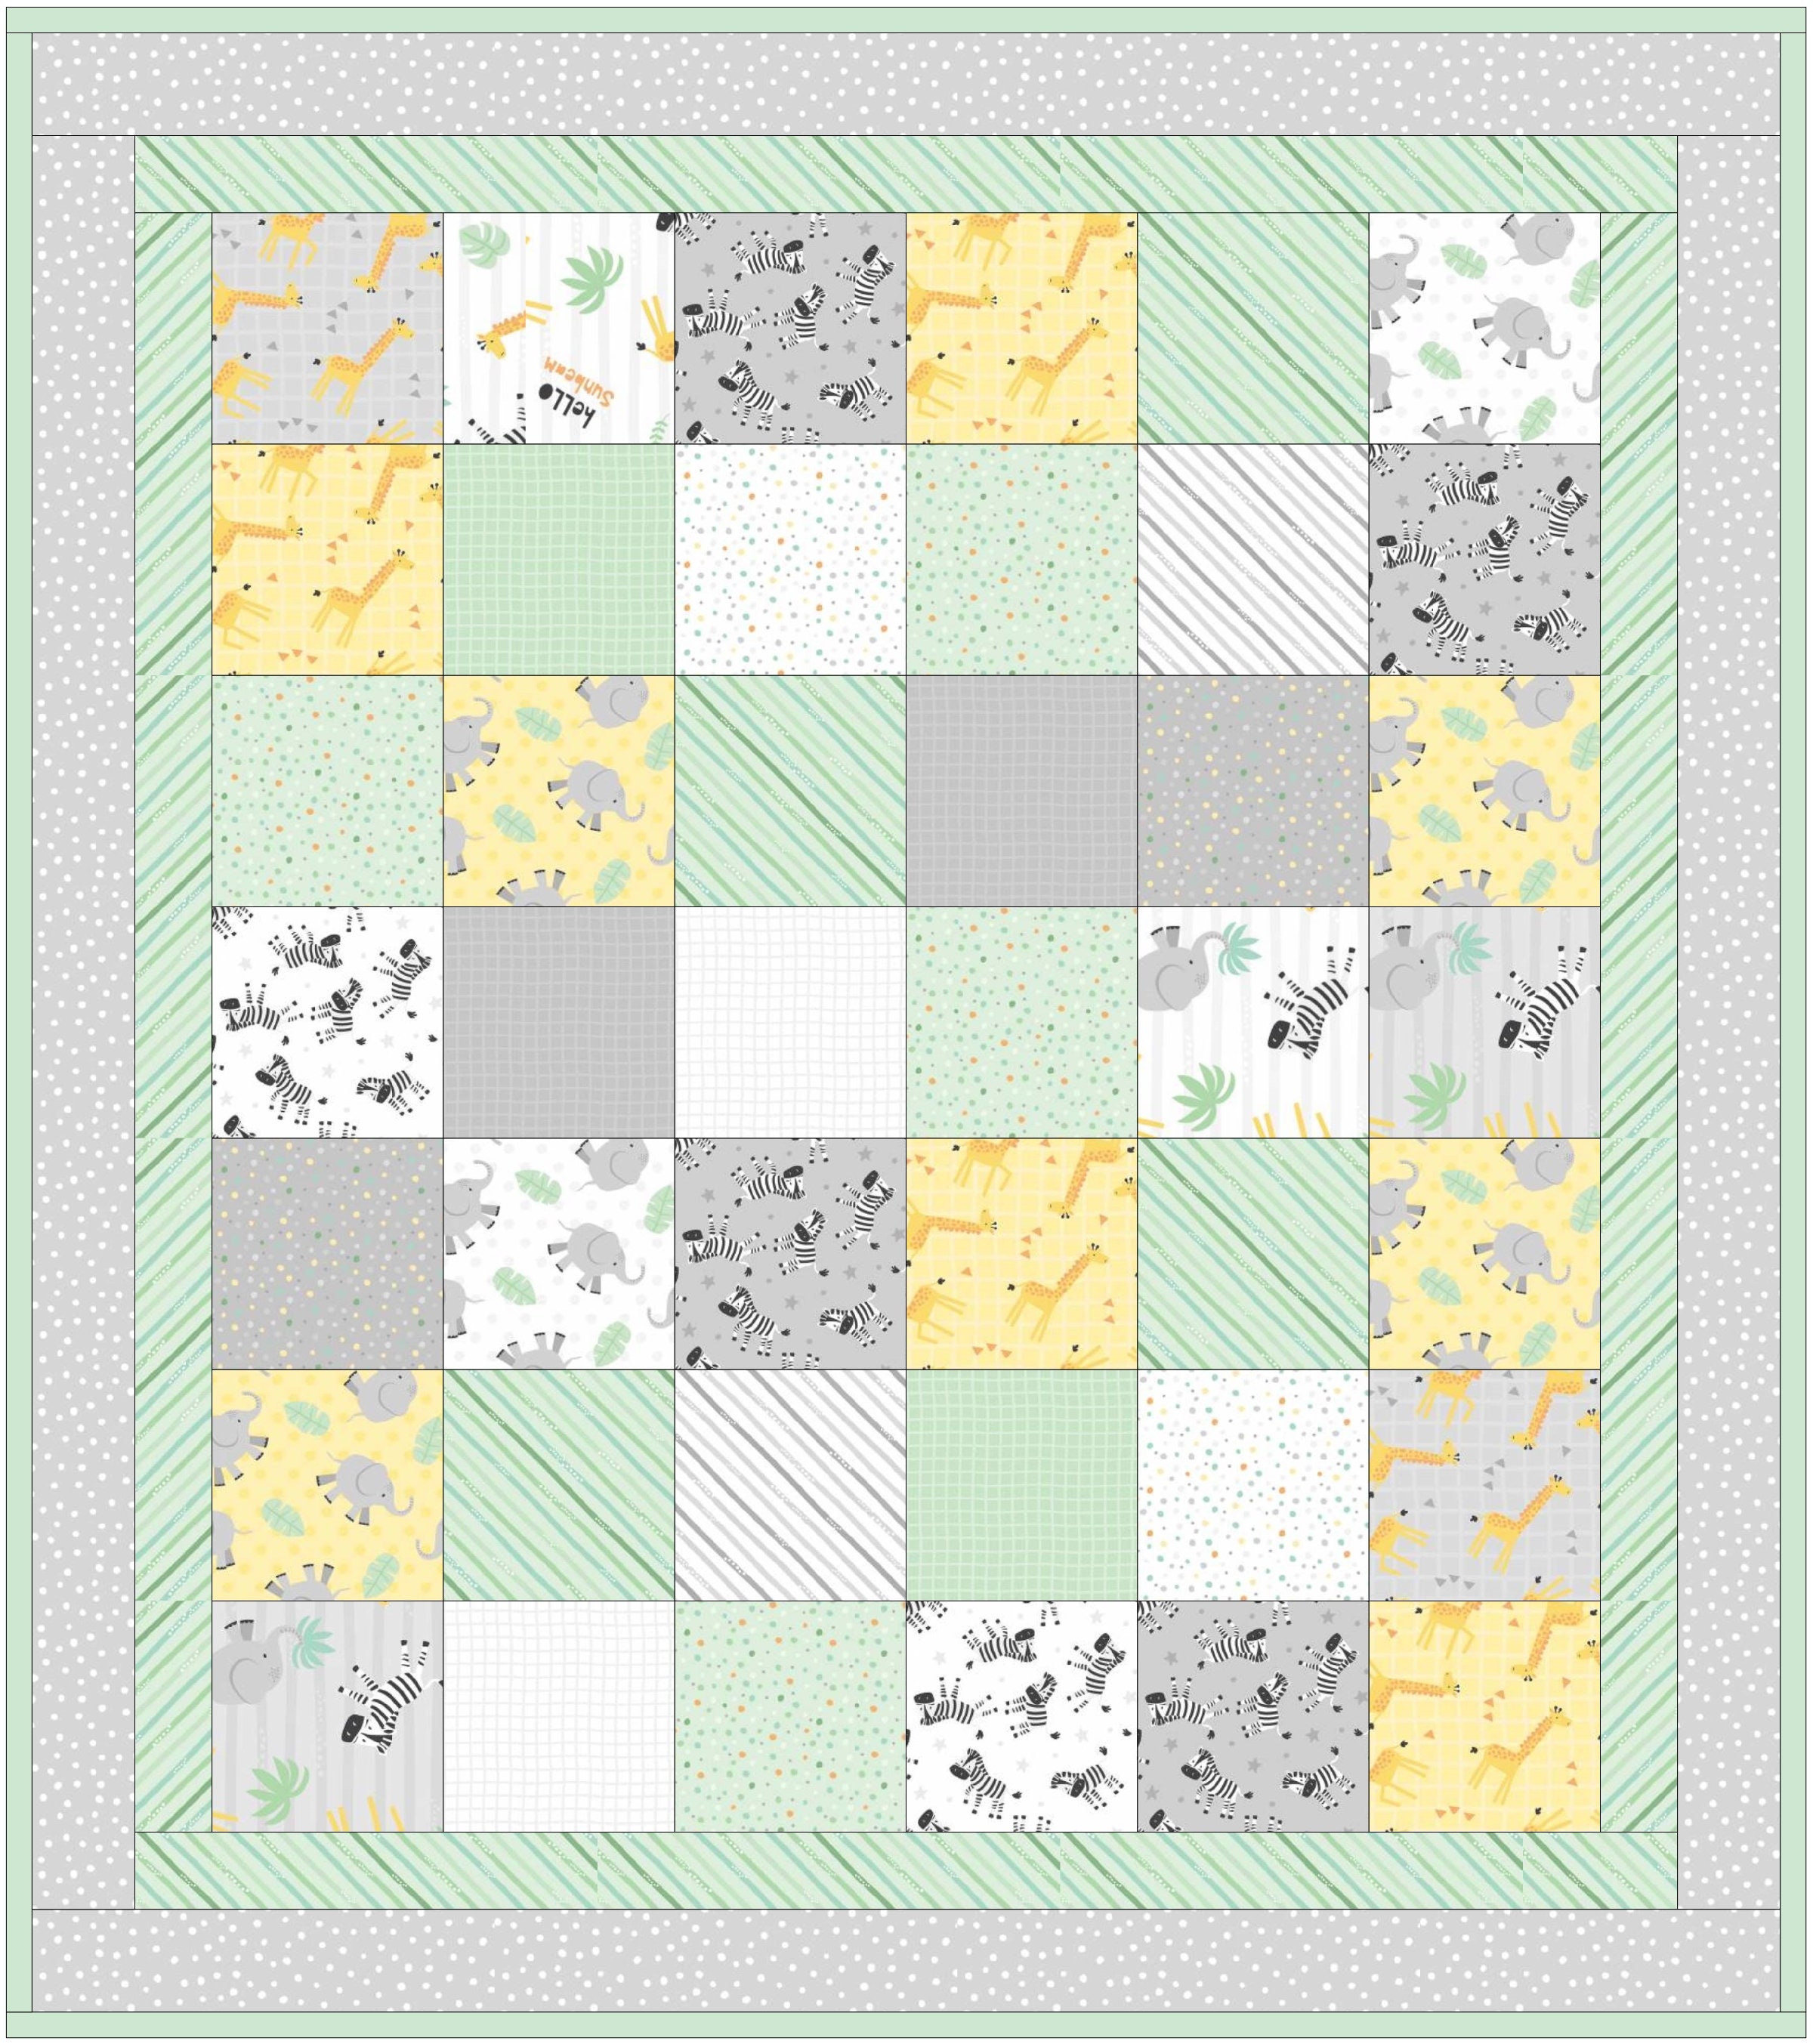 Quick N' Easy 3 Yard Quilts by Donna Robertson for Fabric Cafe 